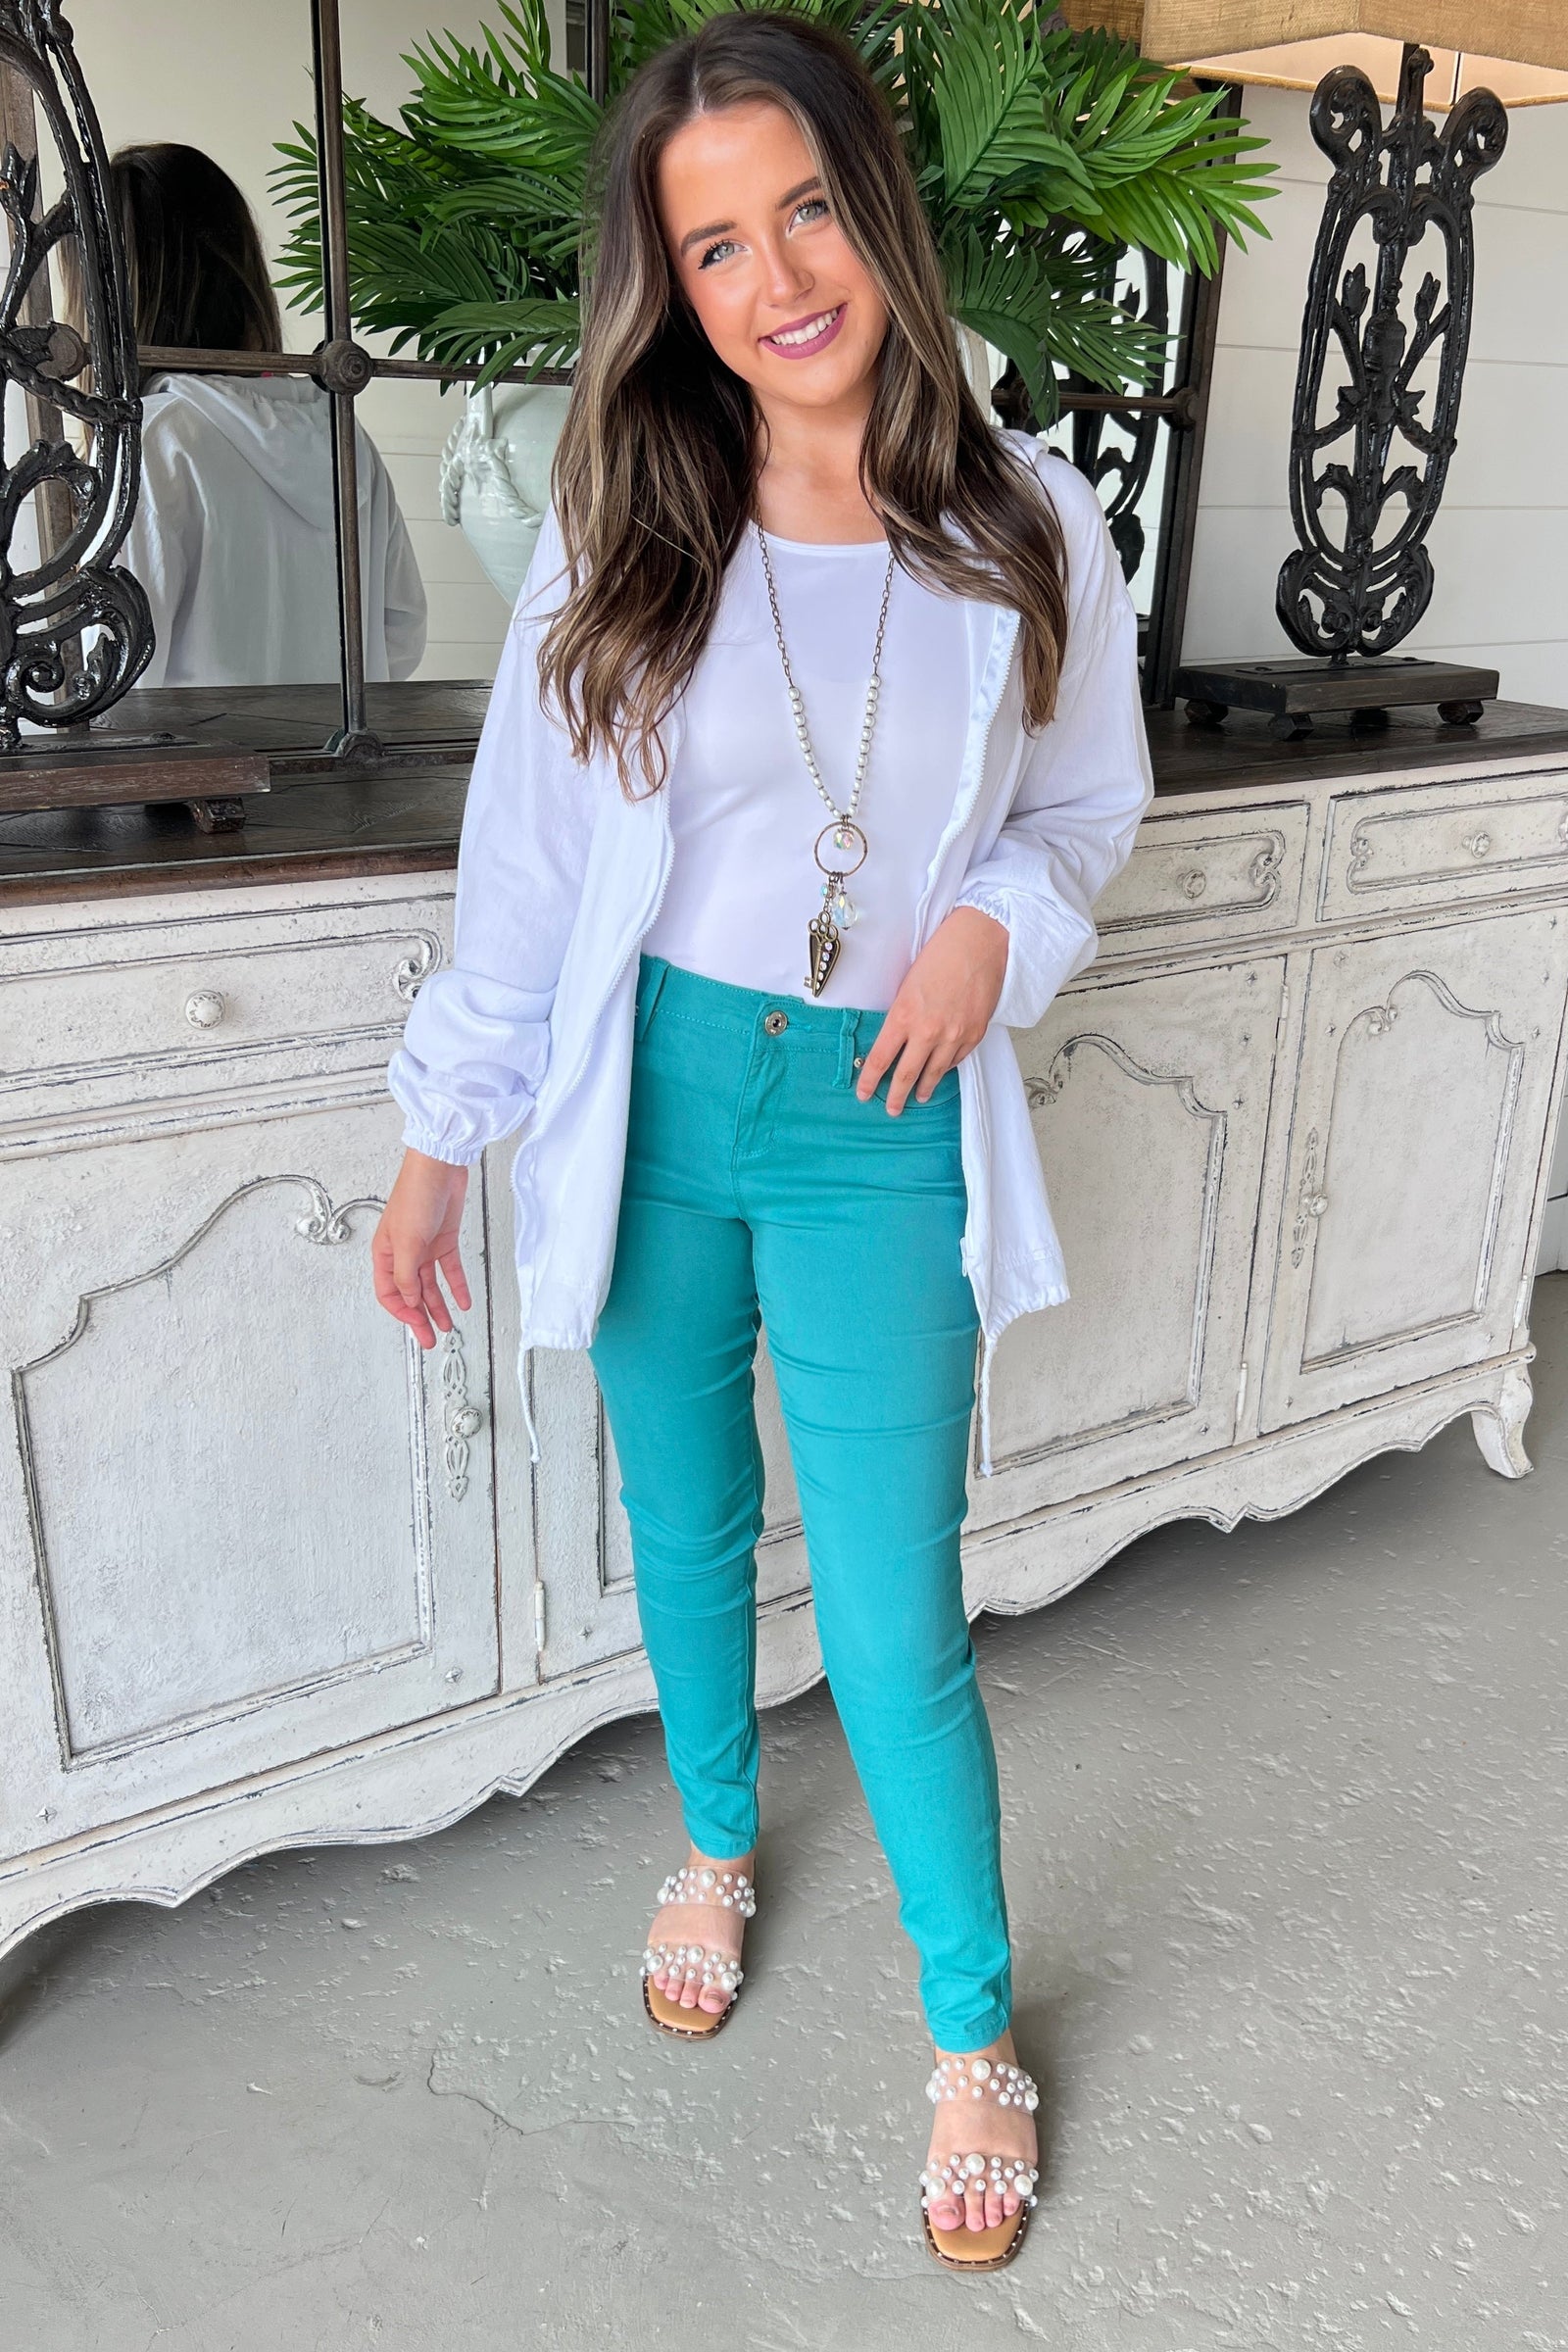 Turquoise Jeans - Worn 5 Ways - Melly Sews